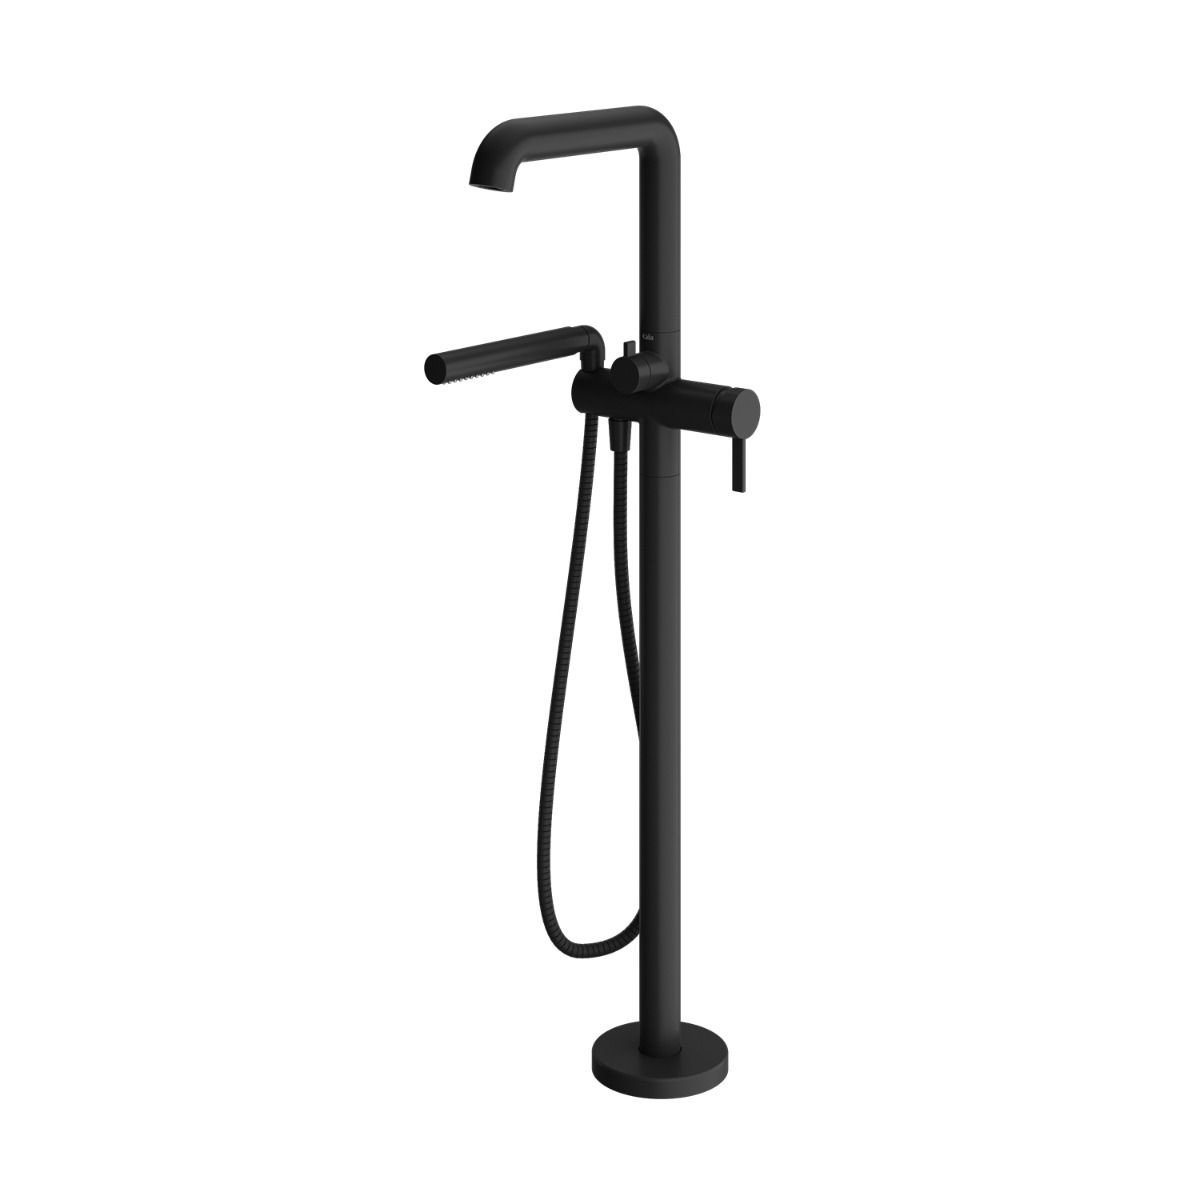 Kalia SPEC Basico 30.87" Pressure Balance Floormount Tub Filler With Handshower Cartridge Included Without Rough-in- Matte Black